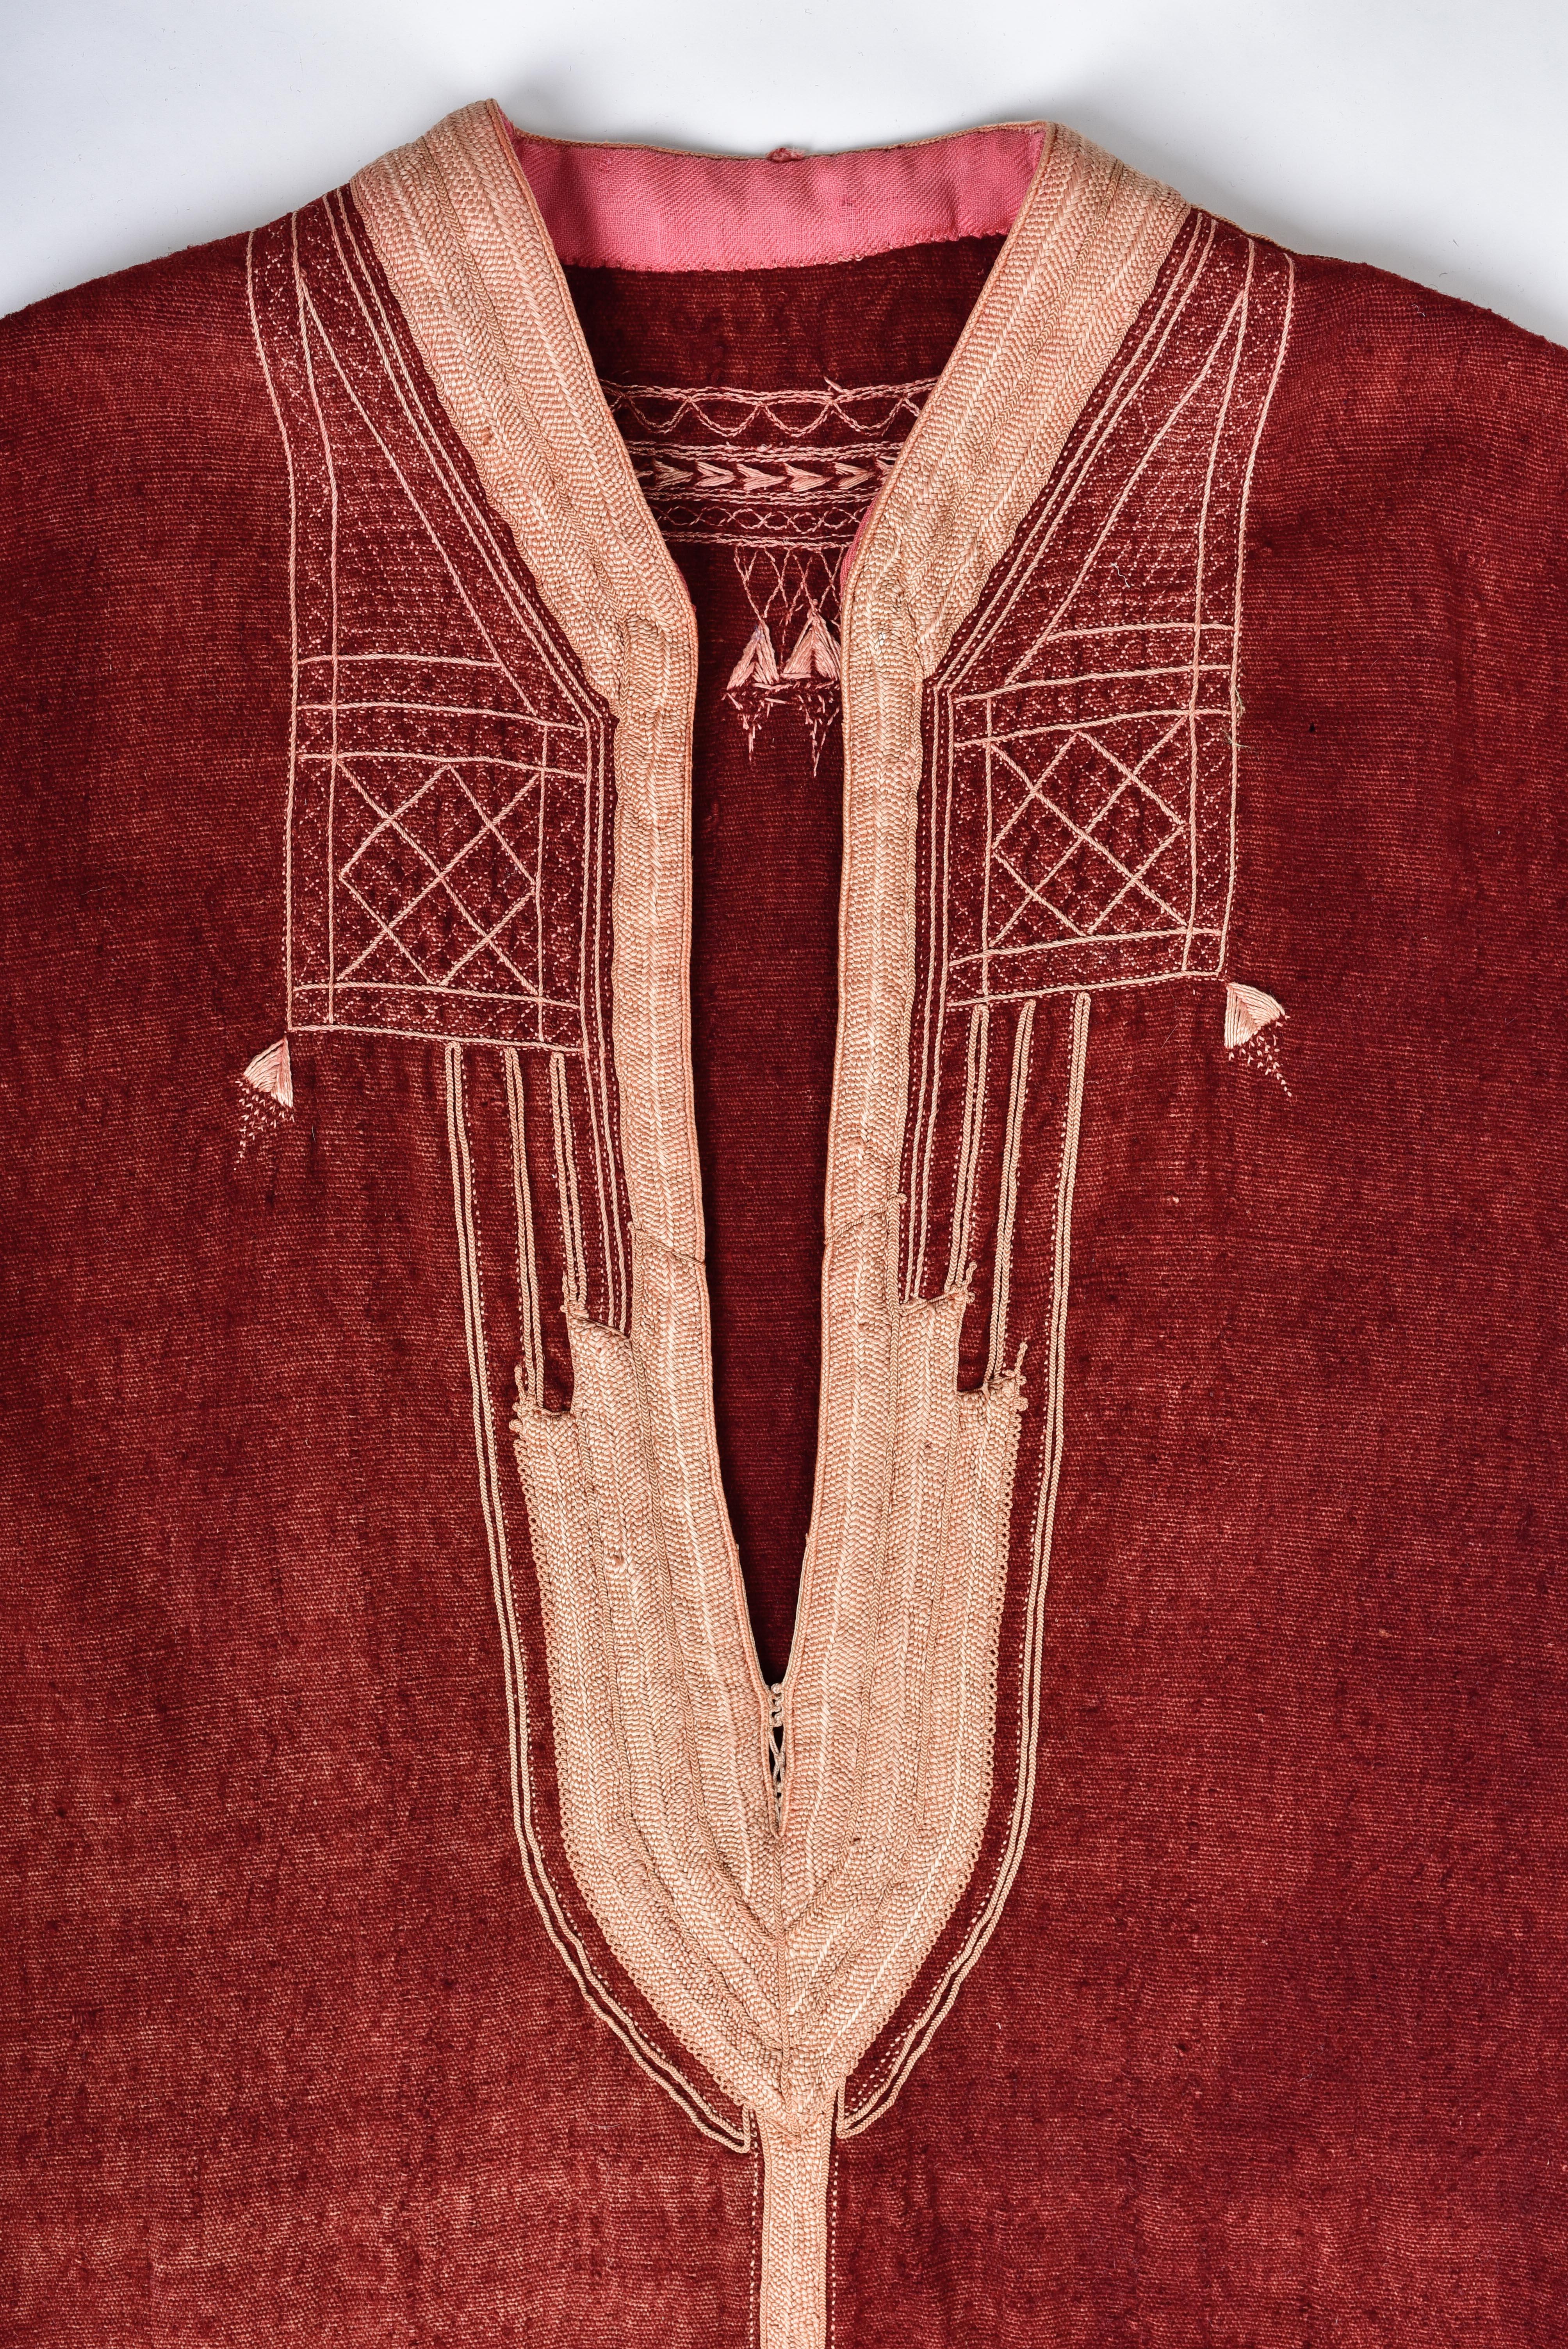 A Berber Djellaba in Dyed Cochineal Embroidered Wool - North Africa Circa 1900 In Good Condition For Sale In Toulon, FR